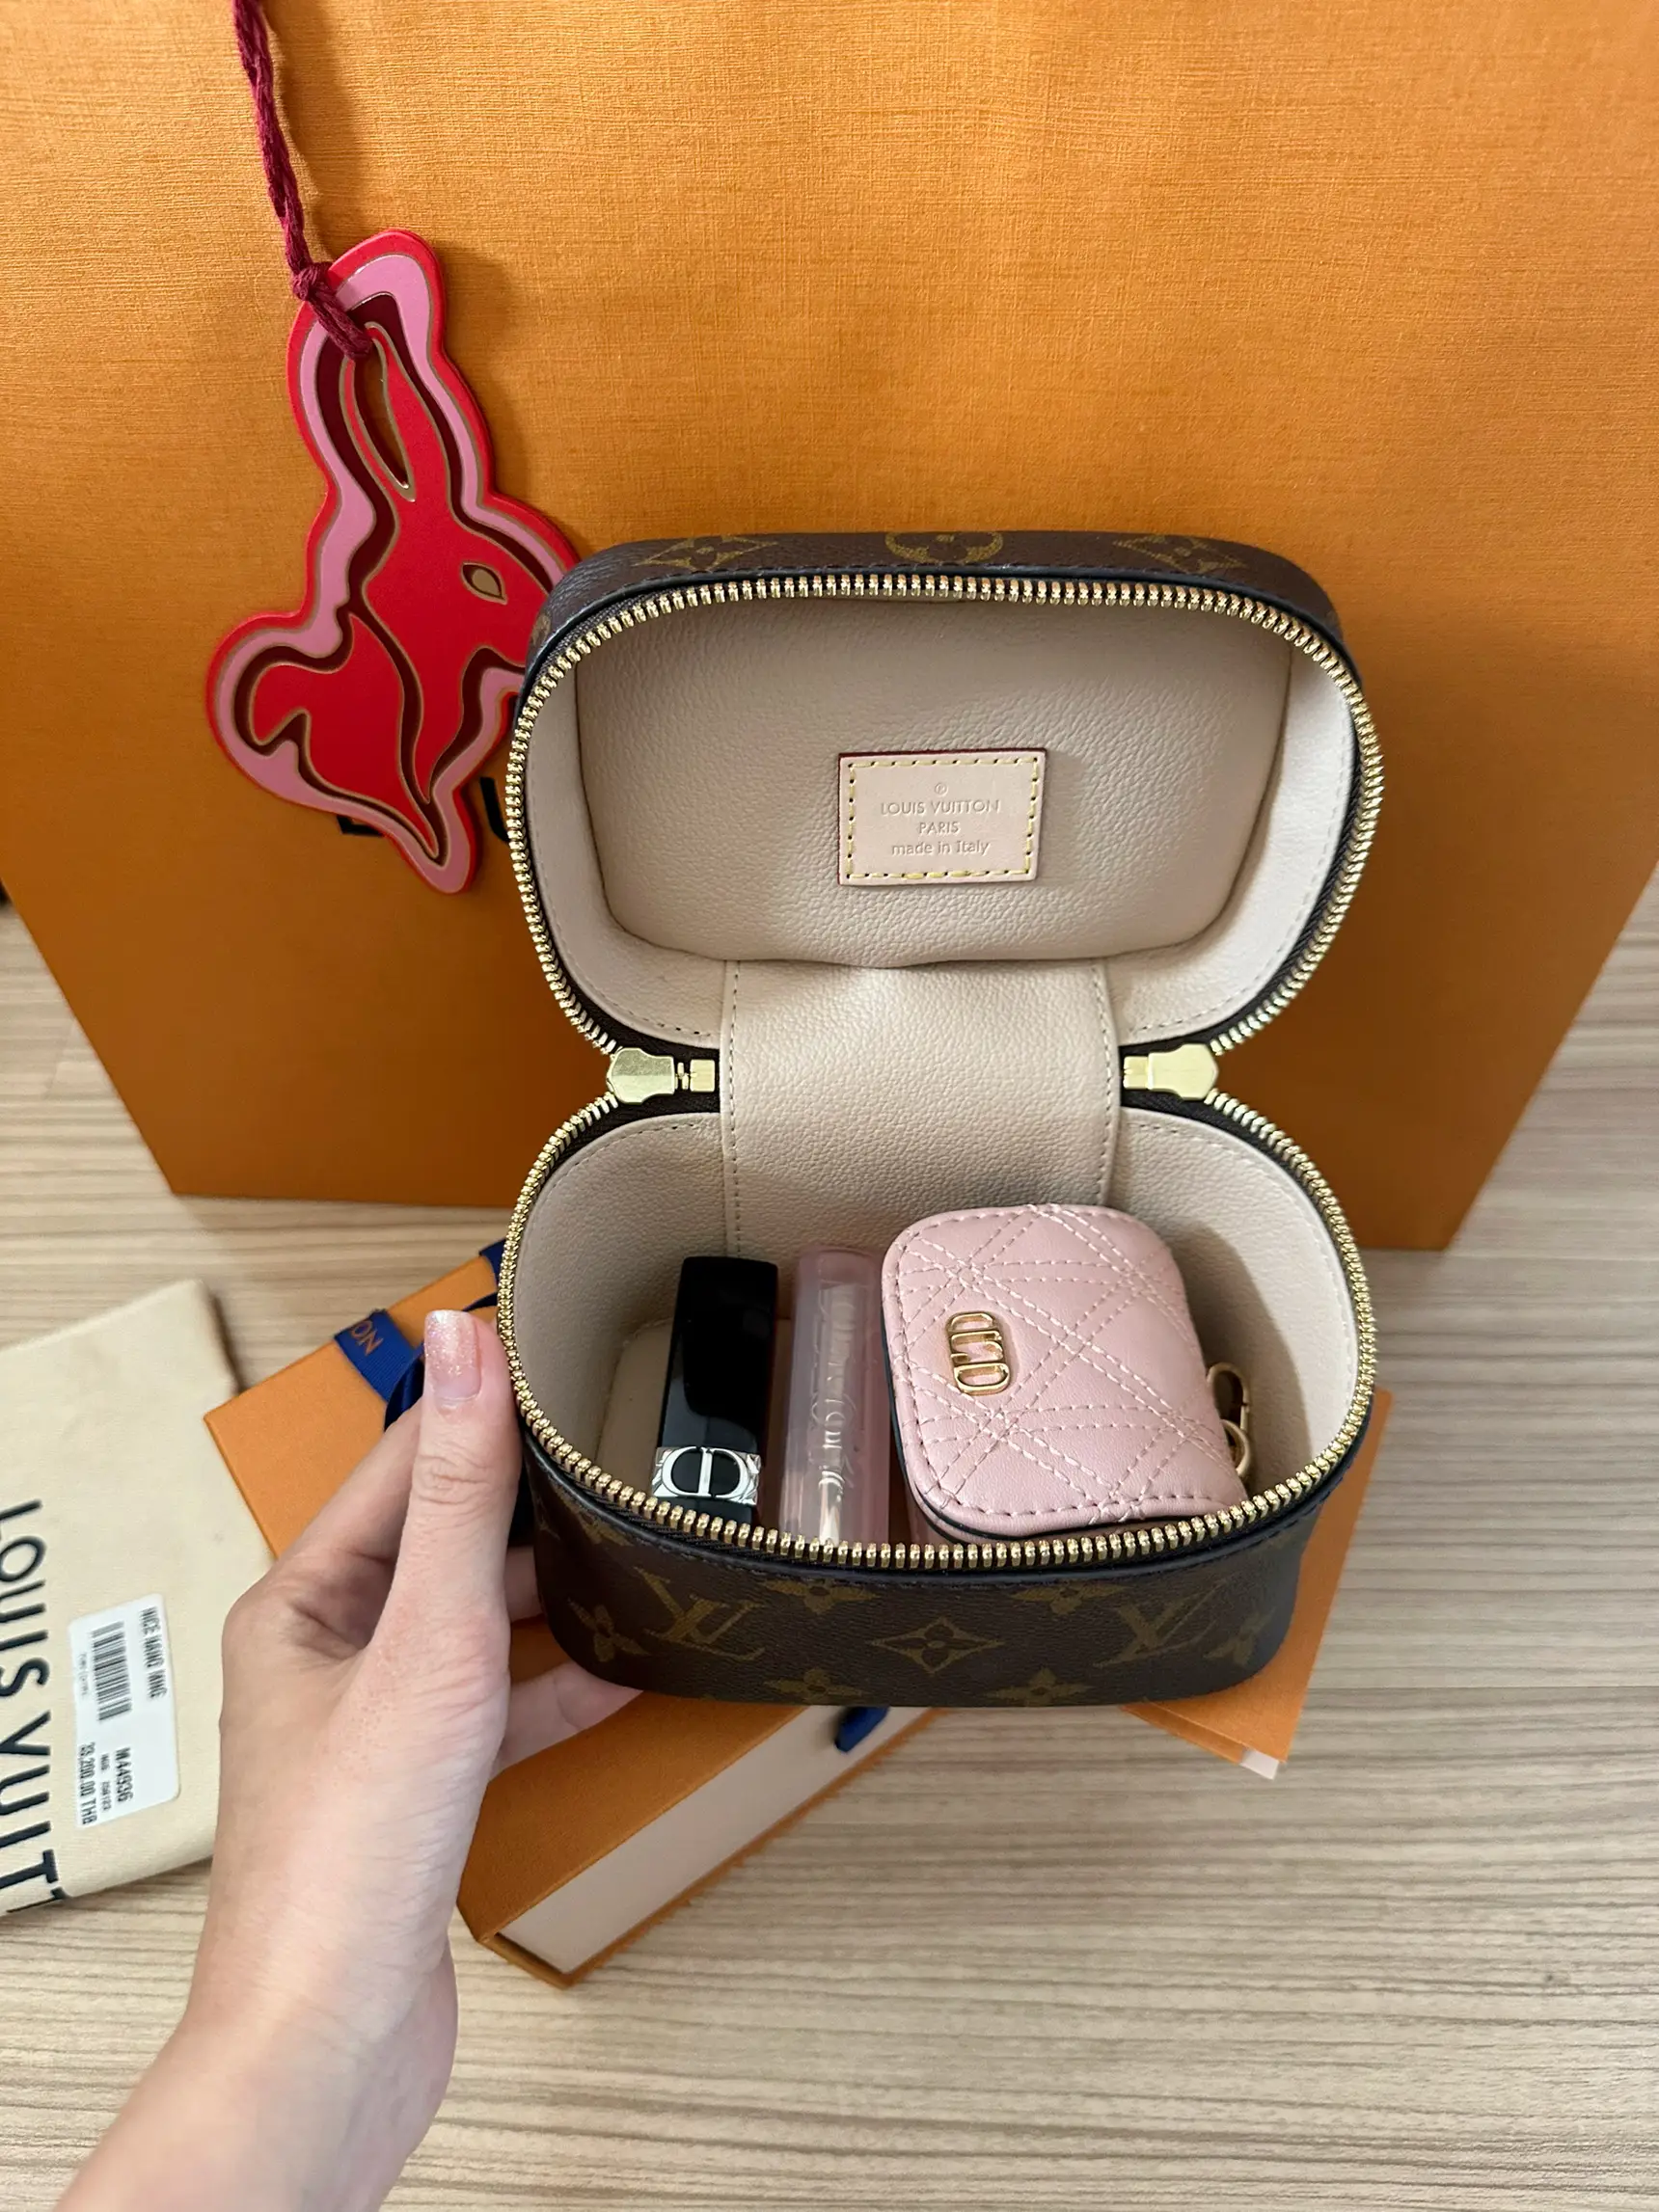 LV nice nano rarest bag now, Gallery posted by Primmii 🧸